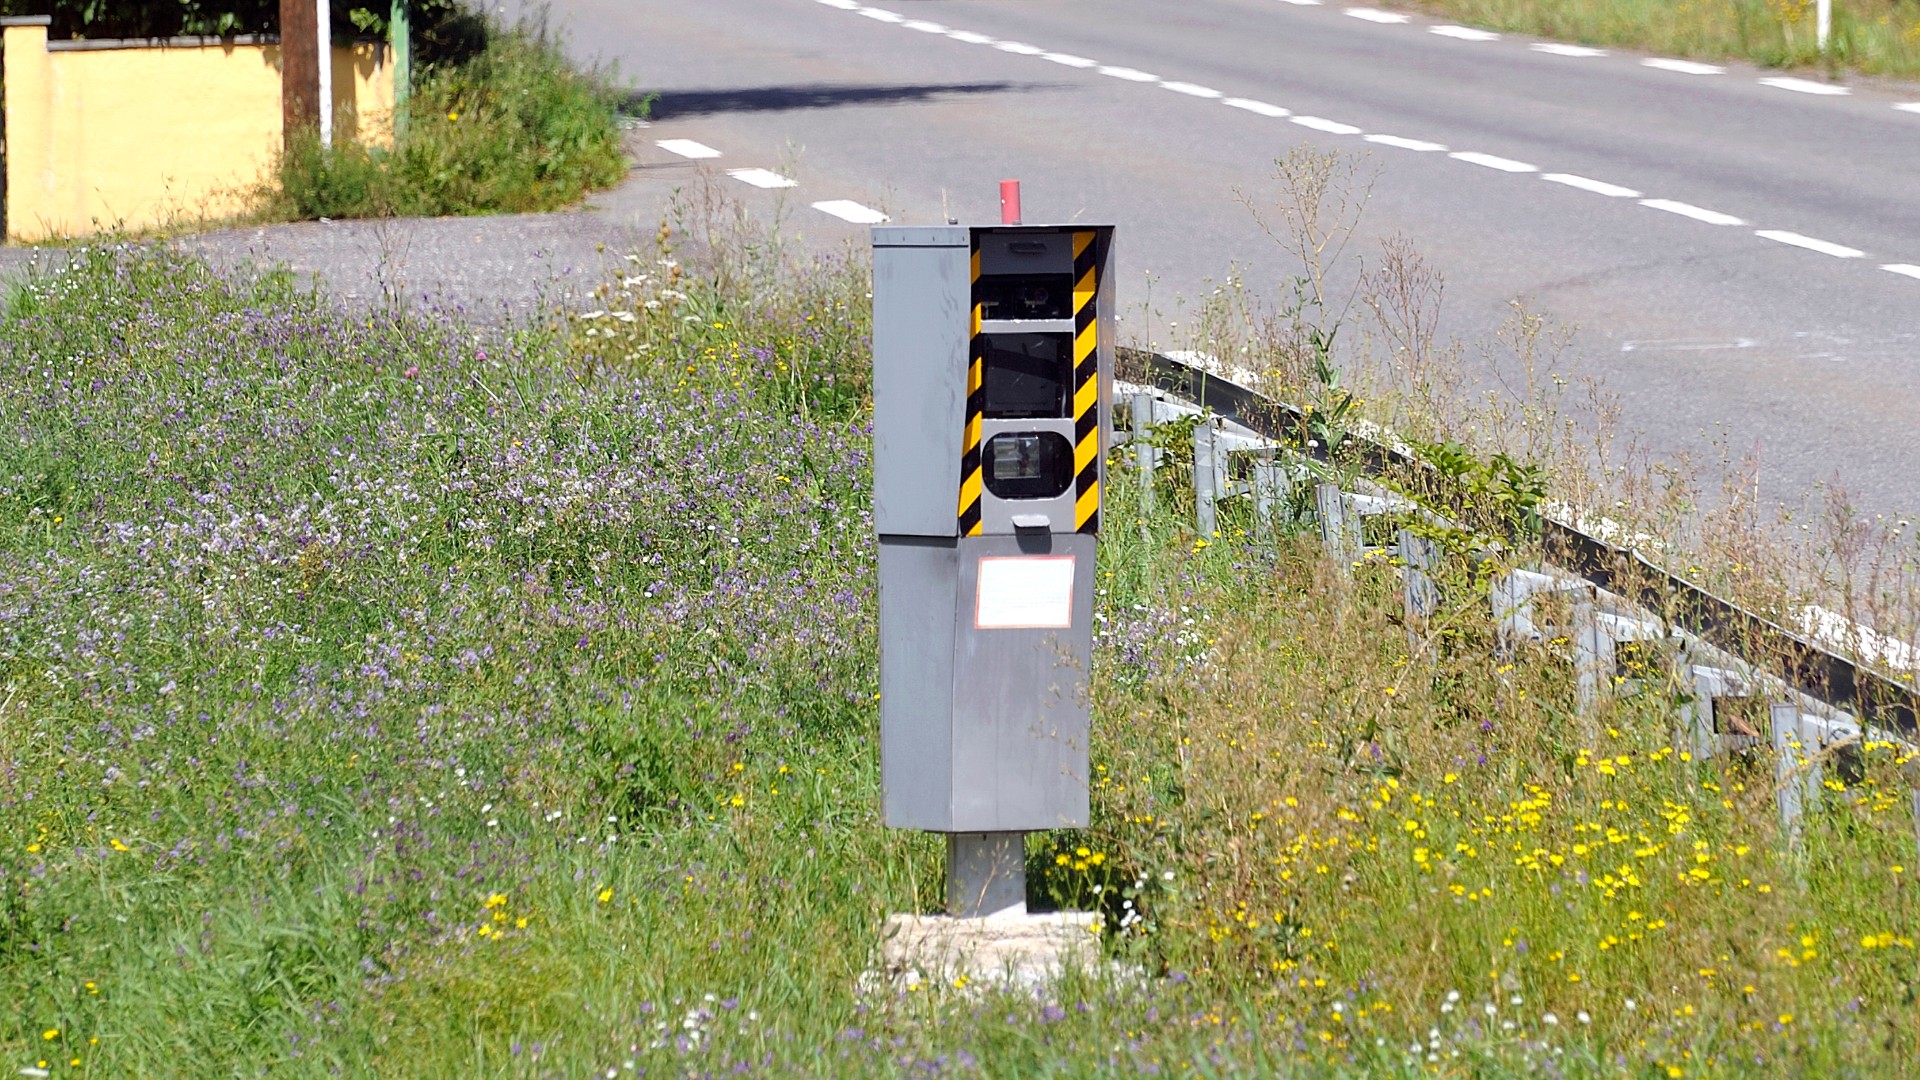 New French speed cameras and driving rules